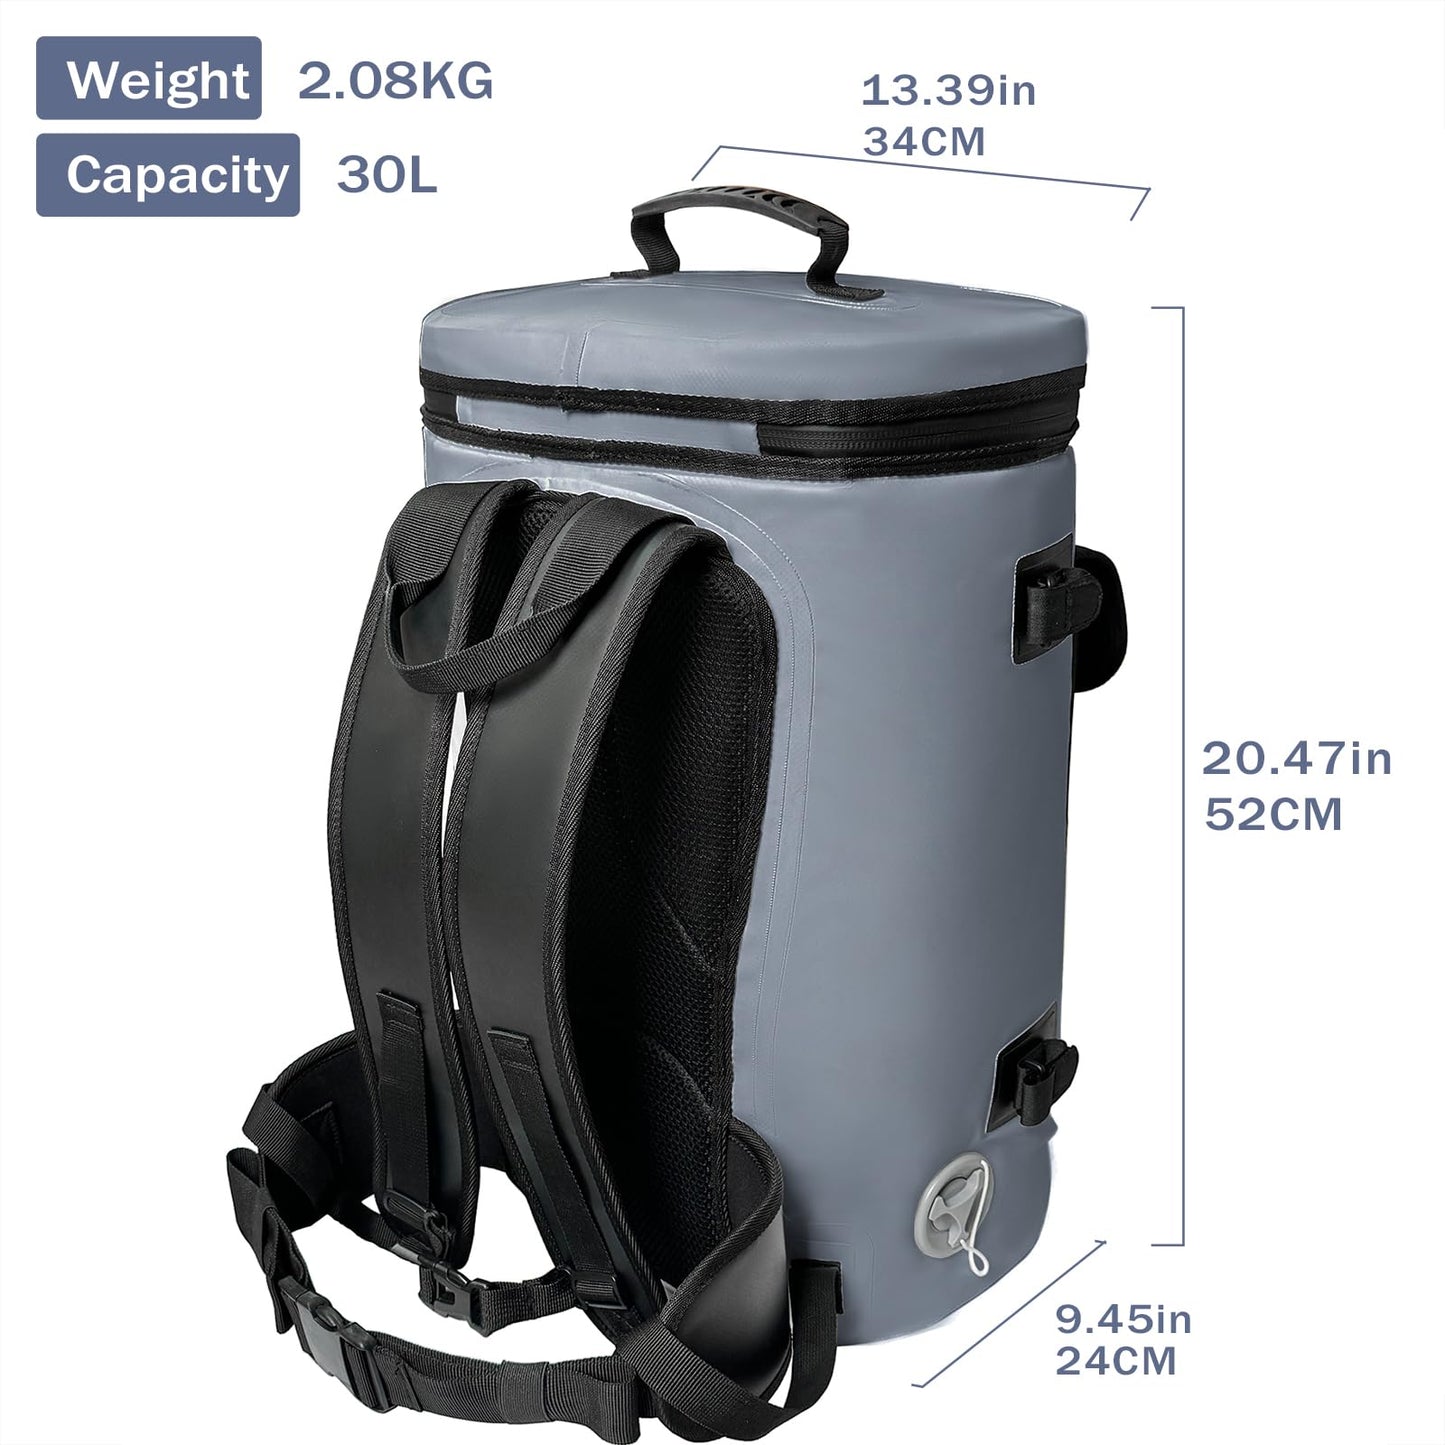 30L Insulated Fish Cooler Backpack, Waterproof Kill Backpack with Drain Plug